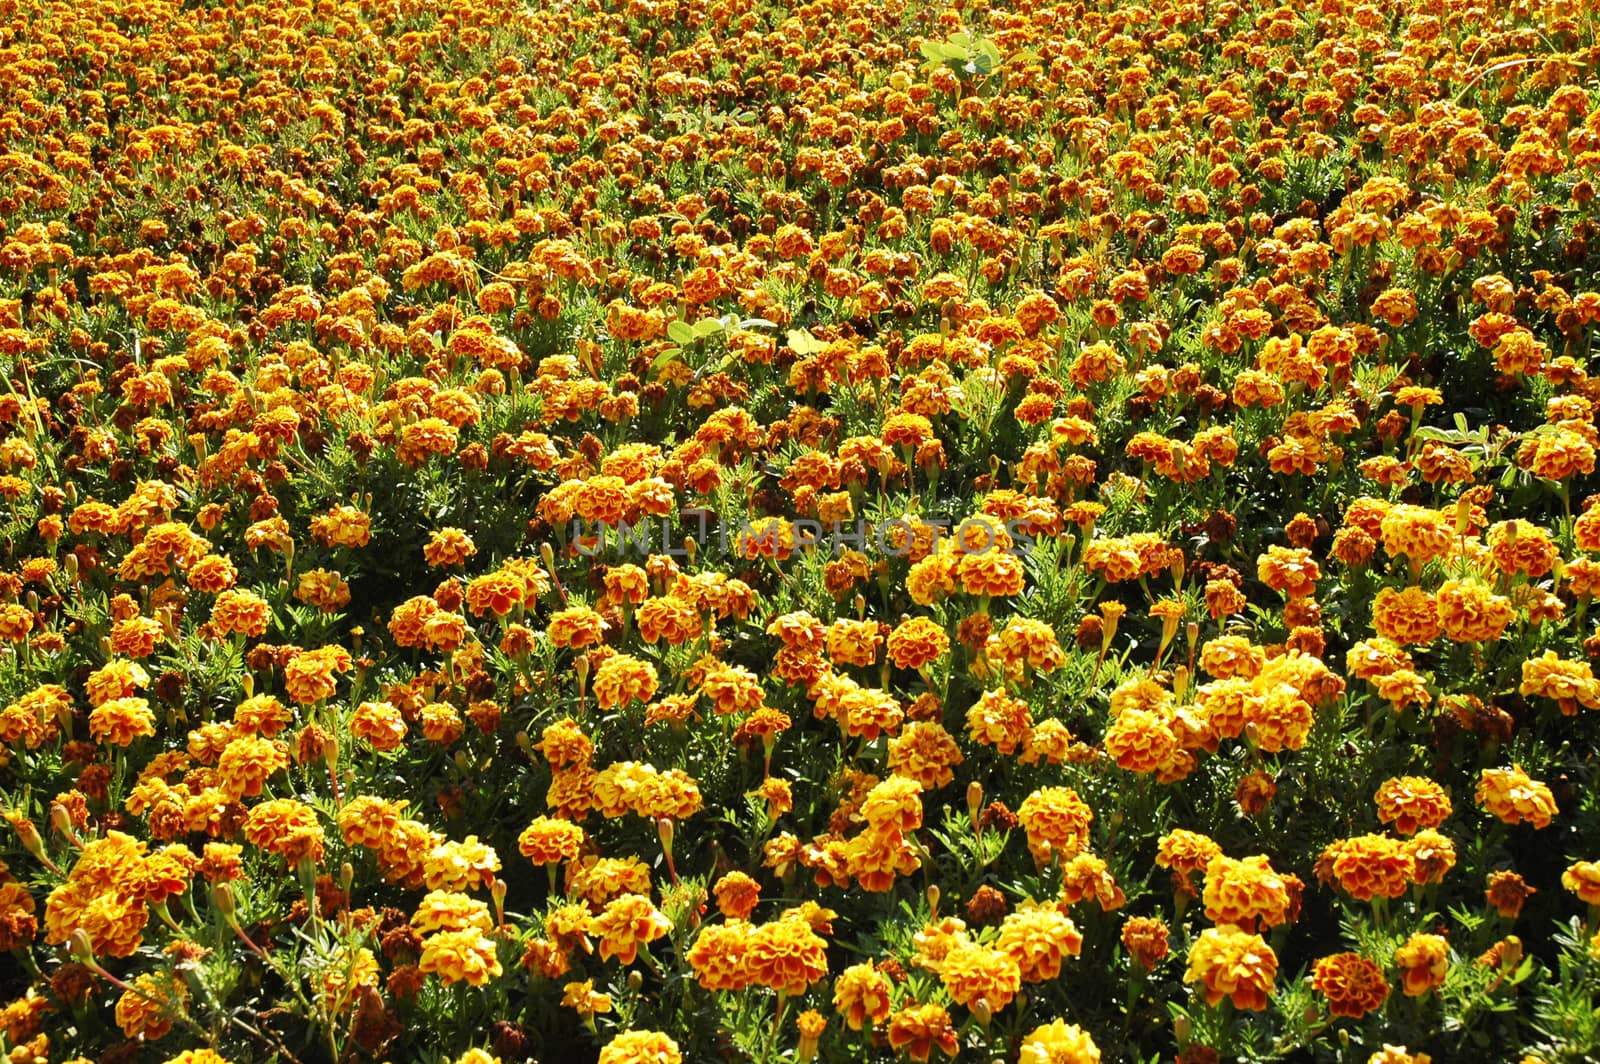 Marigold flowers. Marigold flowers in the meadow in the sunlight. Yellow marigold flowers in the garden. Closeup flower. Yellow and orange marigolds
